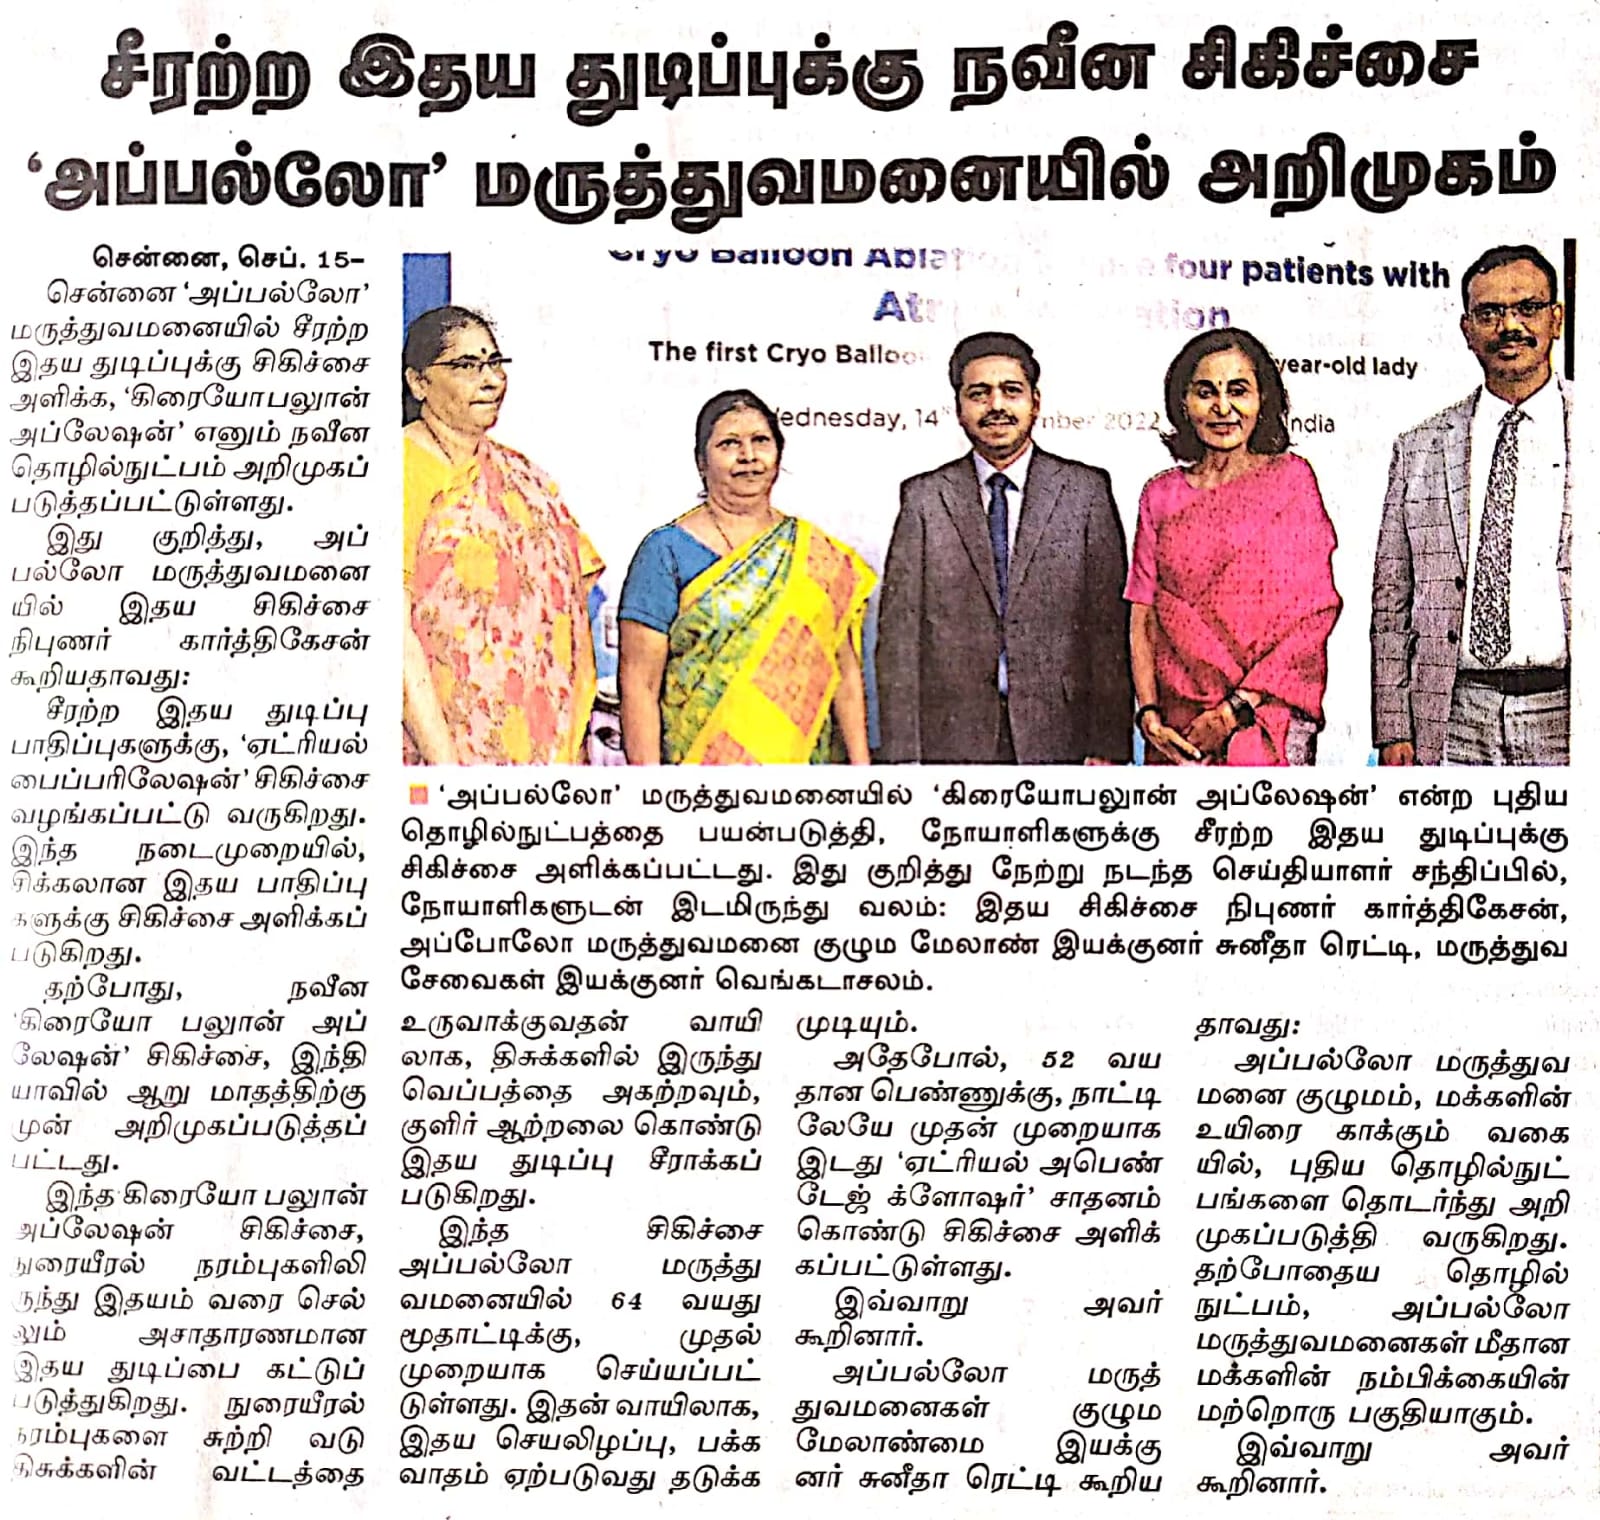 Image of a Tamil news clipping about Dr. Karthigesan and Cryo Ballon Ablation in Dinamalar.